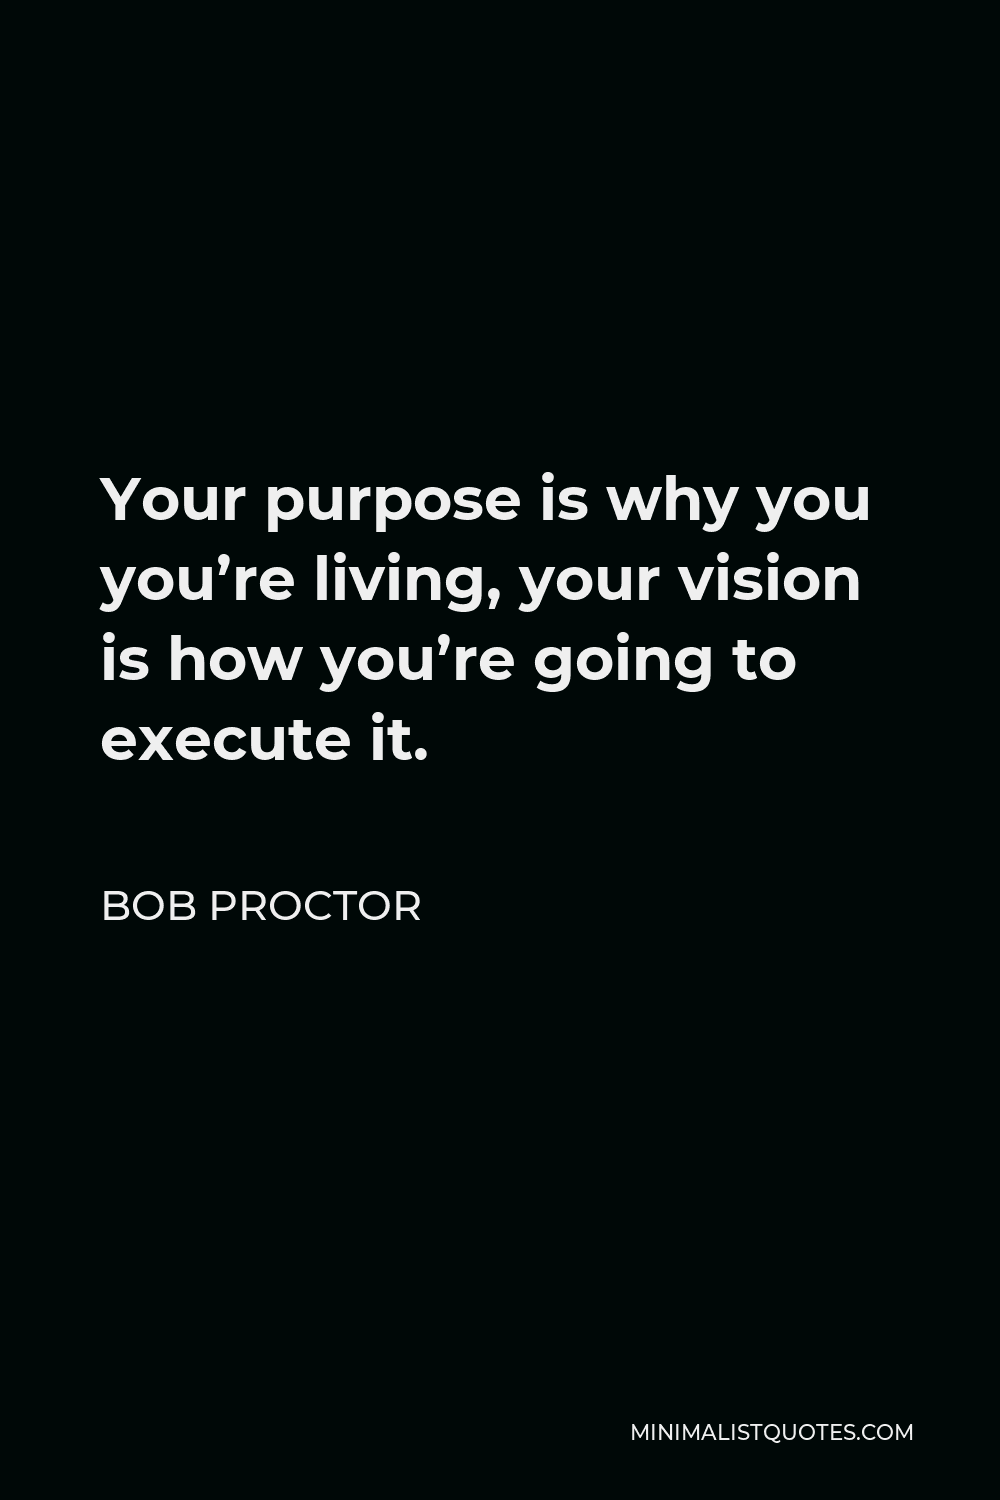 Bob Proctor Quote - Your purpose is why you you’re living, your vision is how you’re going to execute it.